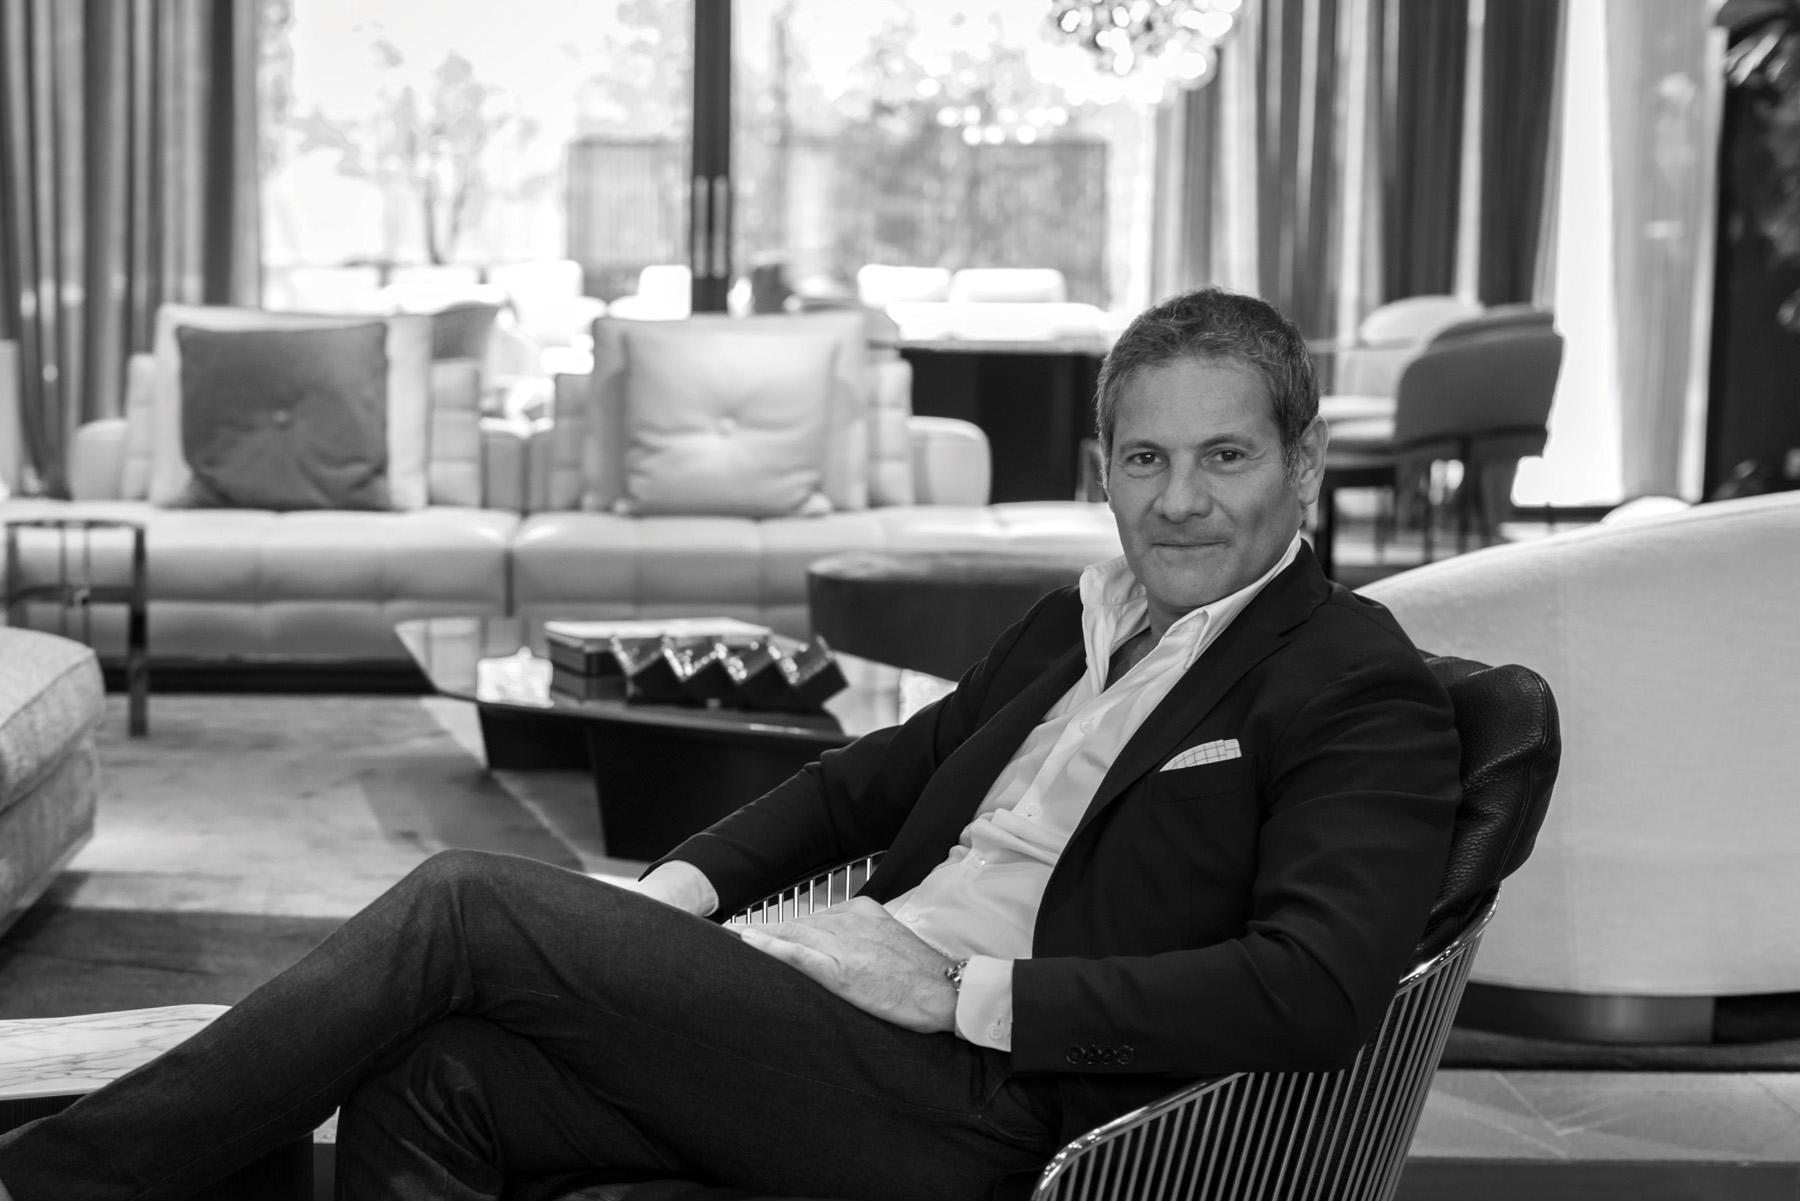 How Minotti Has Been Bringing La Dolce Vita into the Home